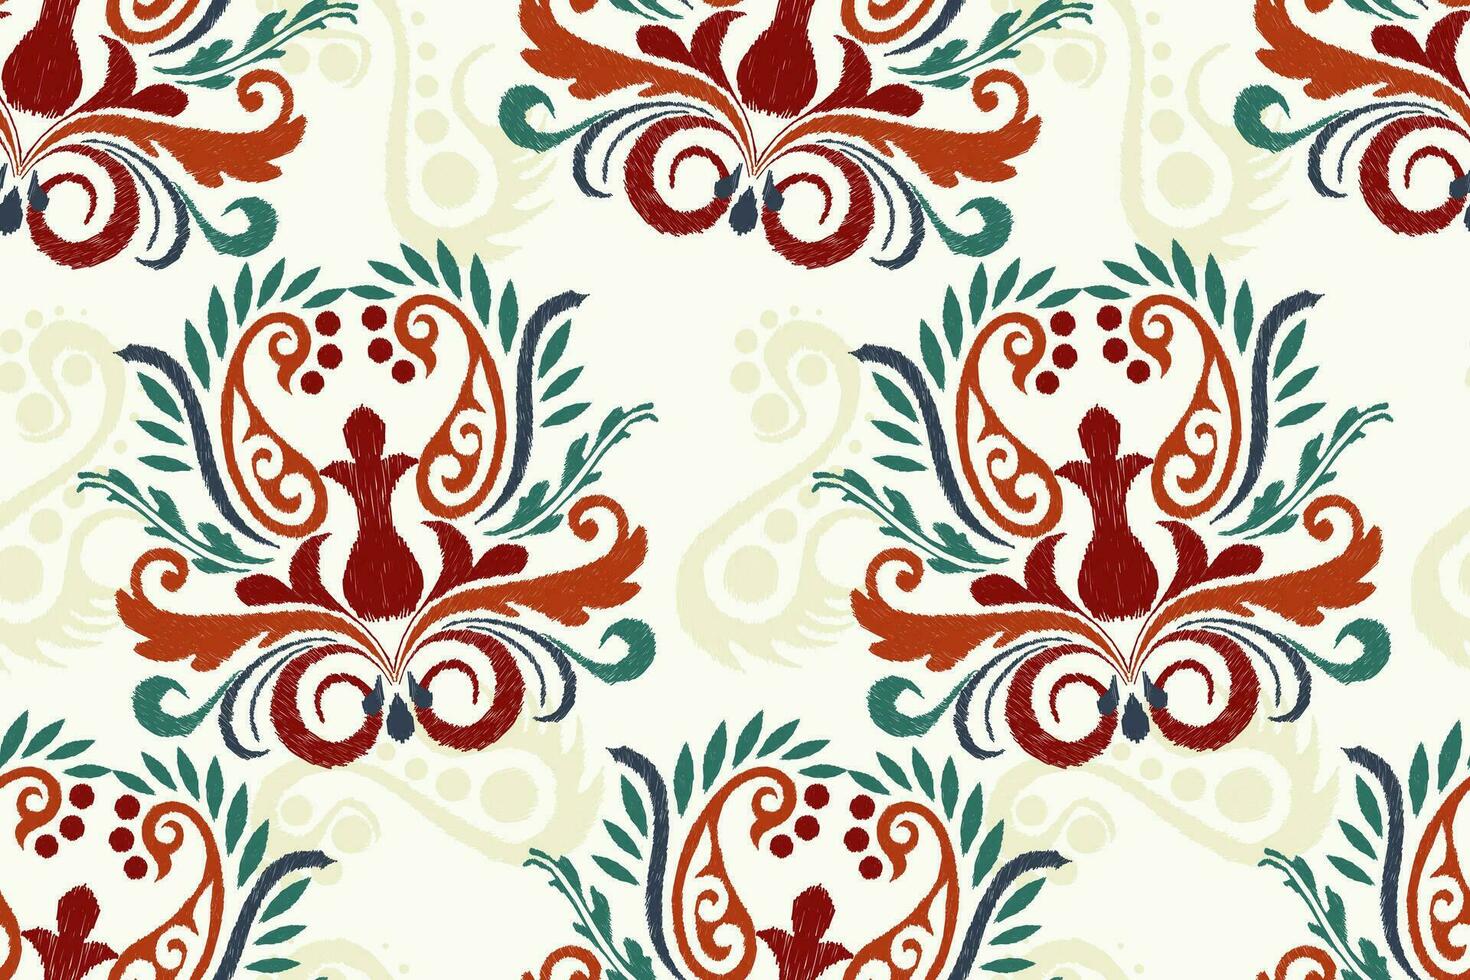 Ikat floral paisley embroidery on white background.Ikat ethnic oriental seamless pattern traditional.Aztec style abstract vector illustration.design for texture,fabric,clothing,wrapping,decoration.